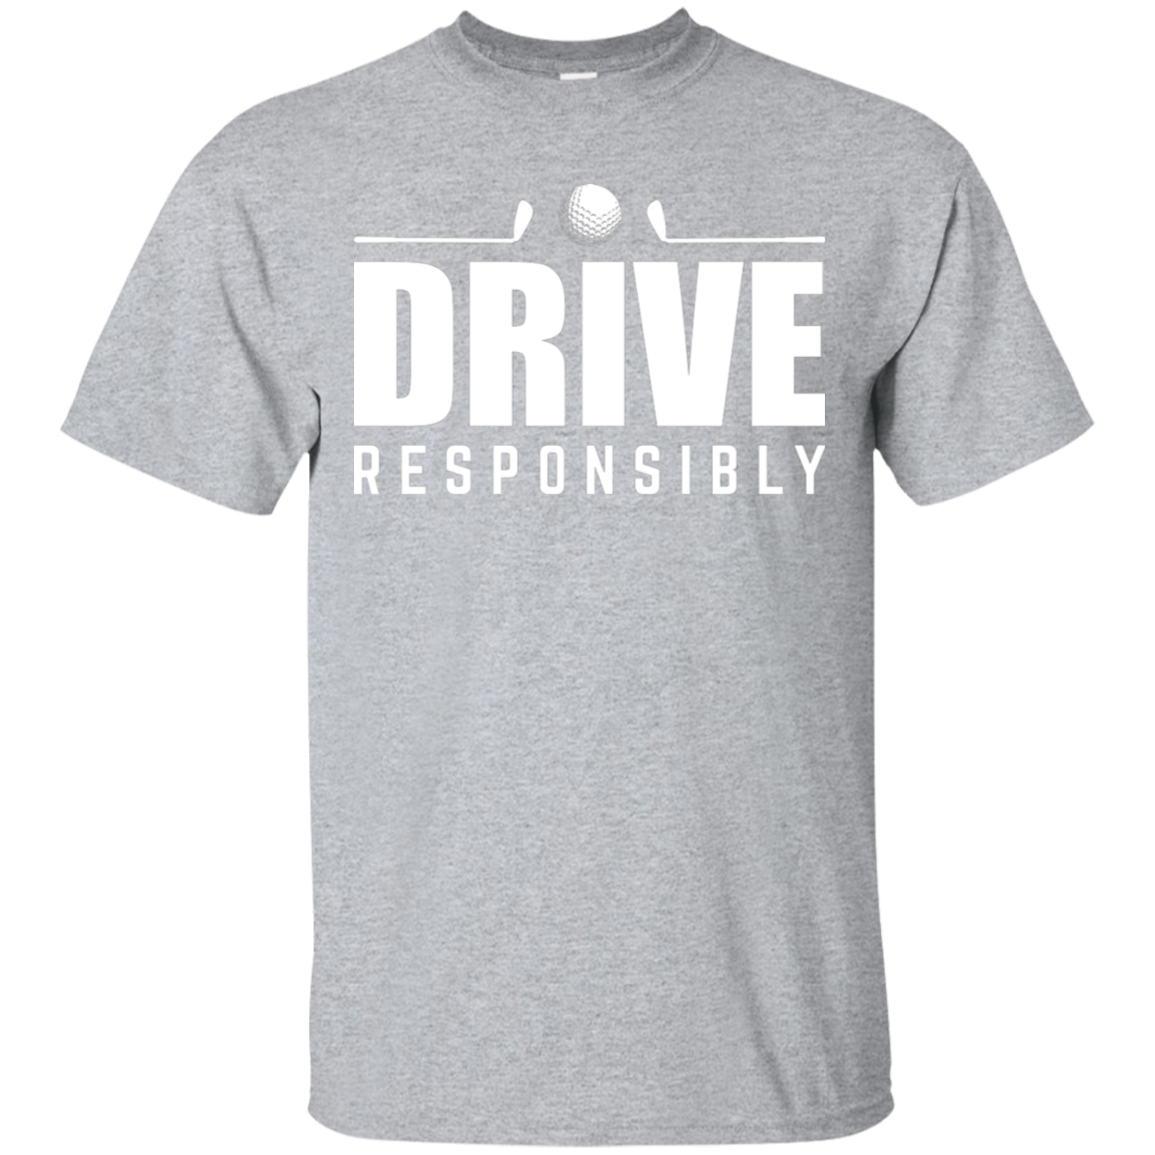 Drive Responsibly T-Shirt Apparel - The Beer Lodge